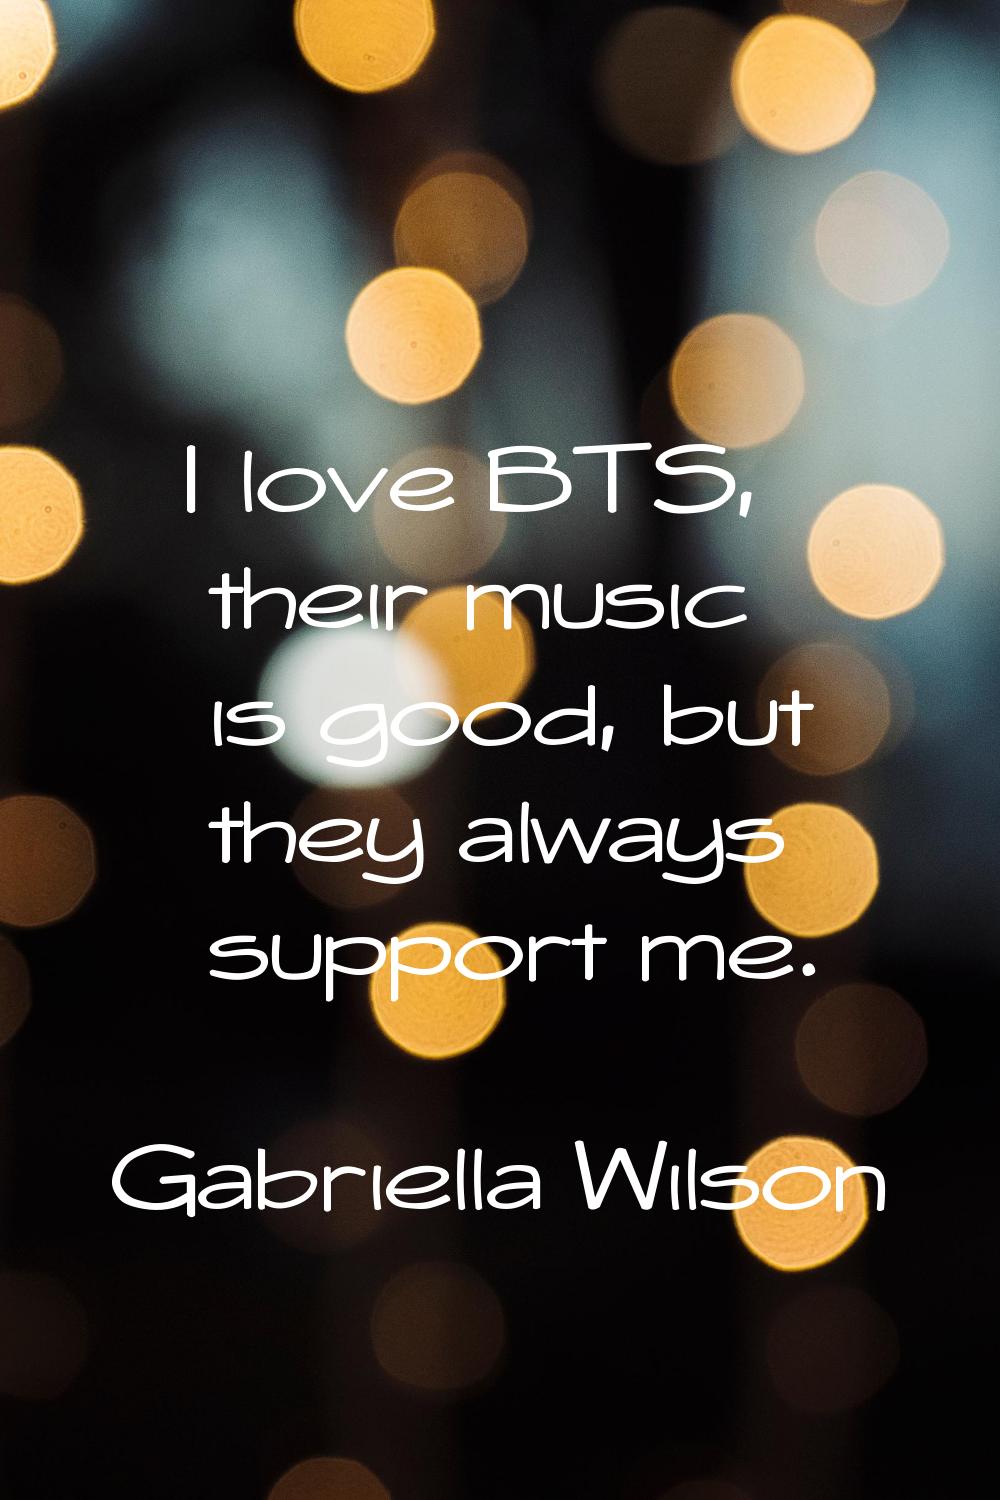 I love BTS, their music is good, but they always support me.